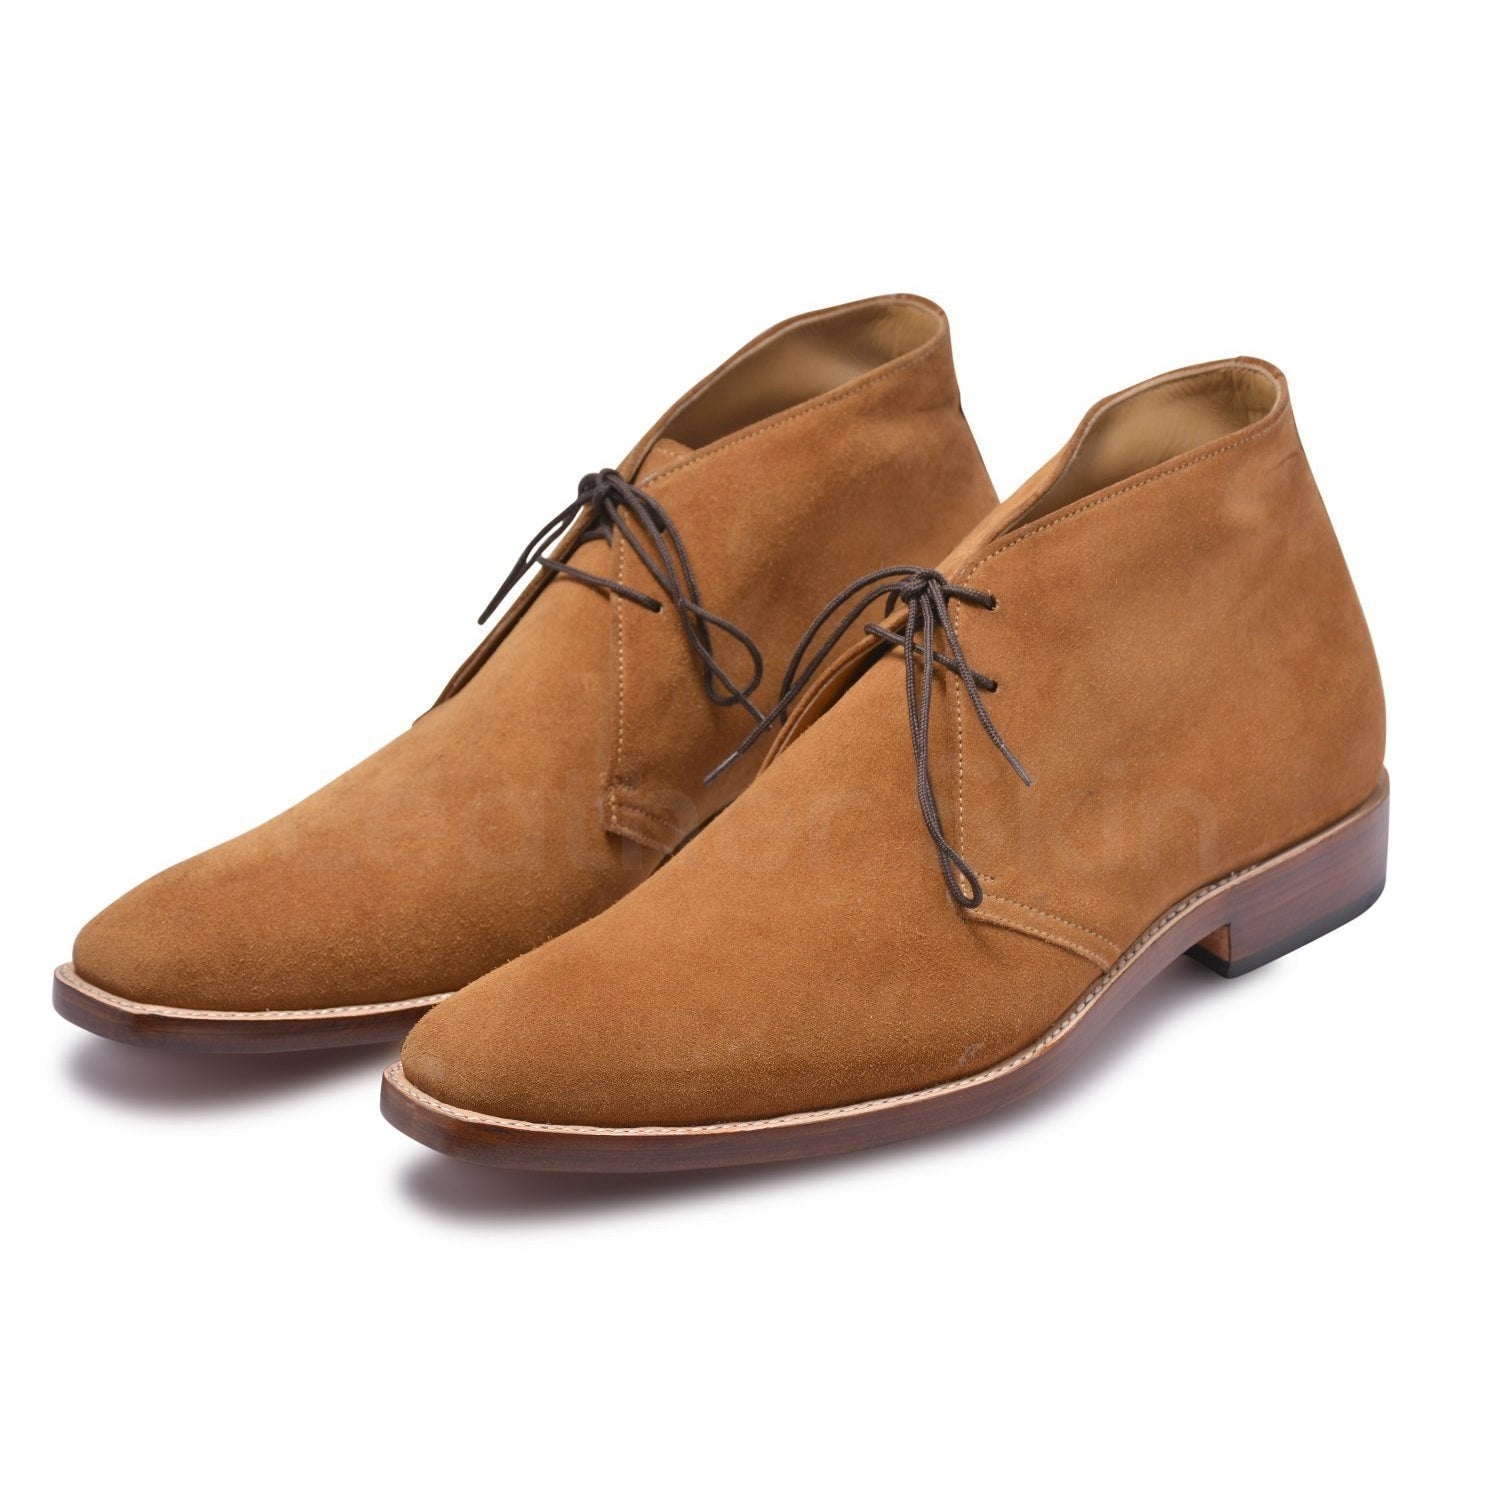 Men Tan Suede Chukka Leather Boots - Leather Skin